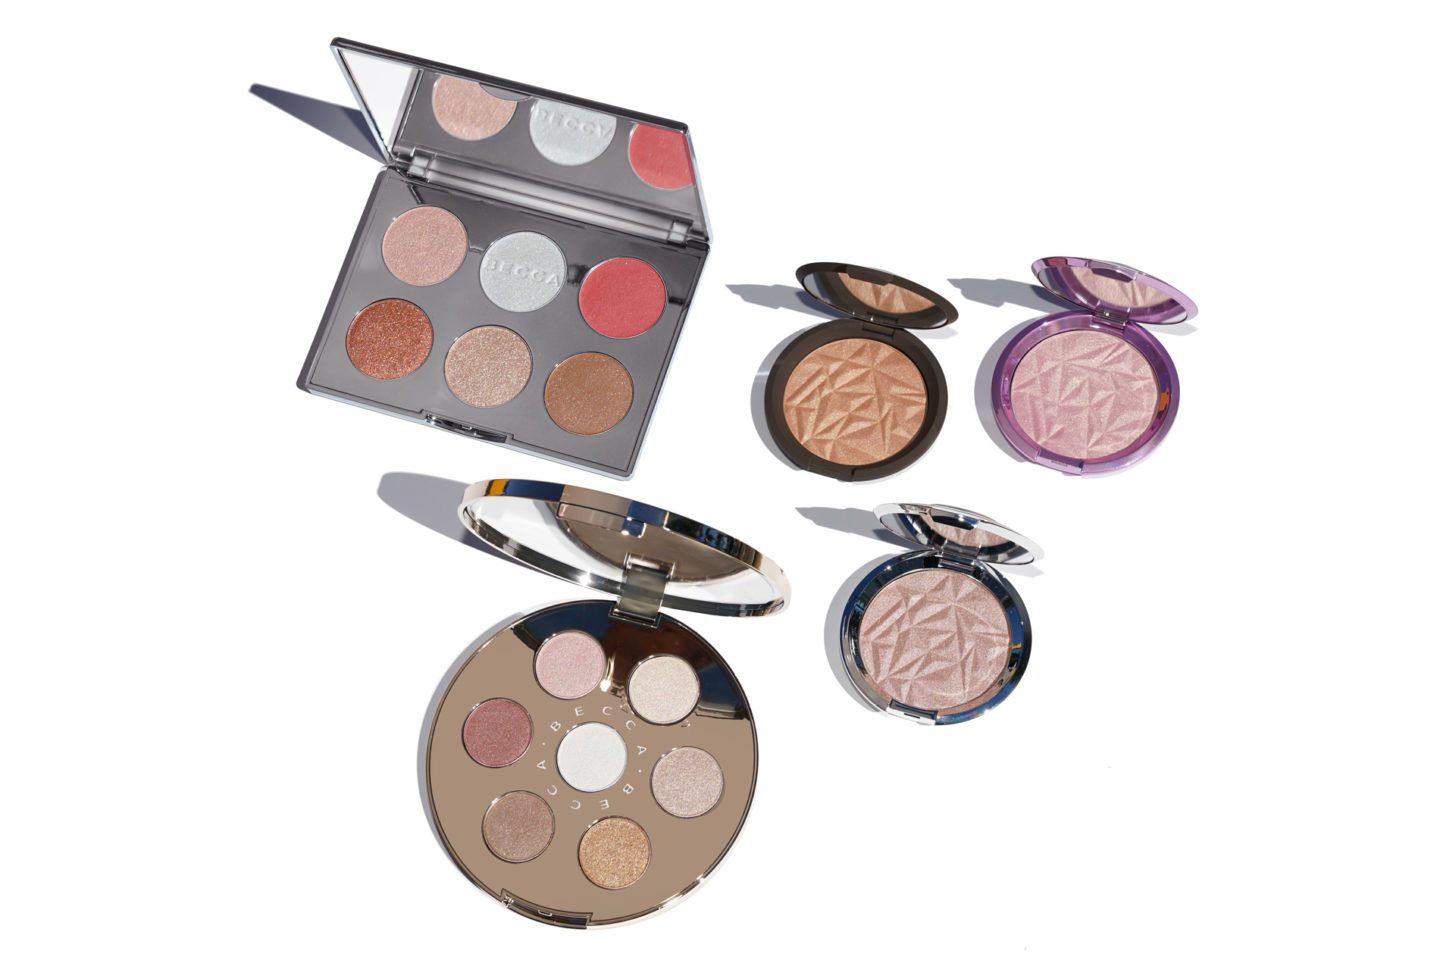 Becca Apres Ski Palettes, Shimmering Skin Perfector Bronzed Amber, Lilac Geode and Smoky Quartz